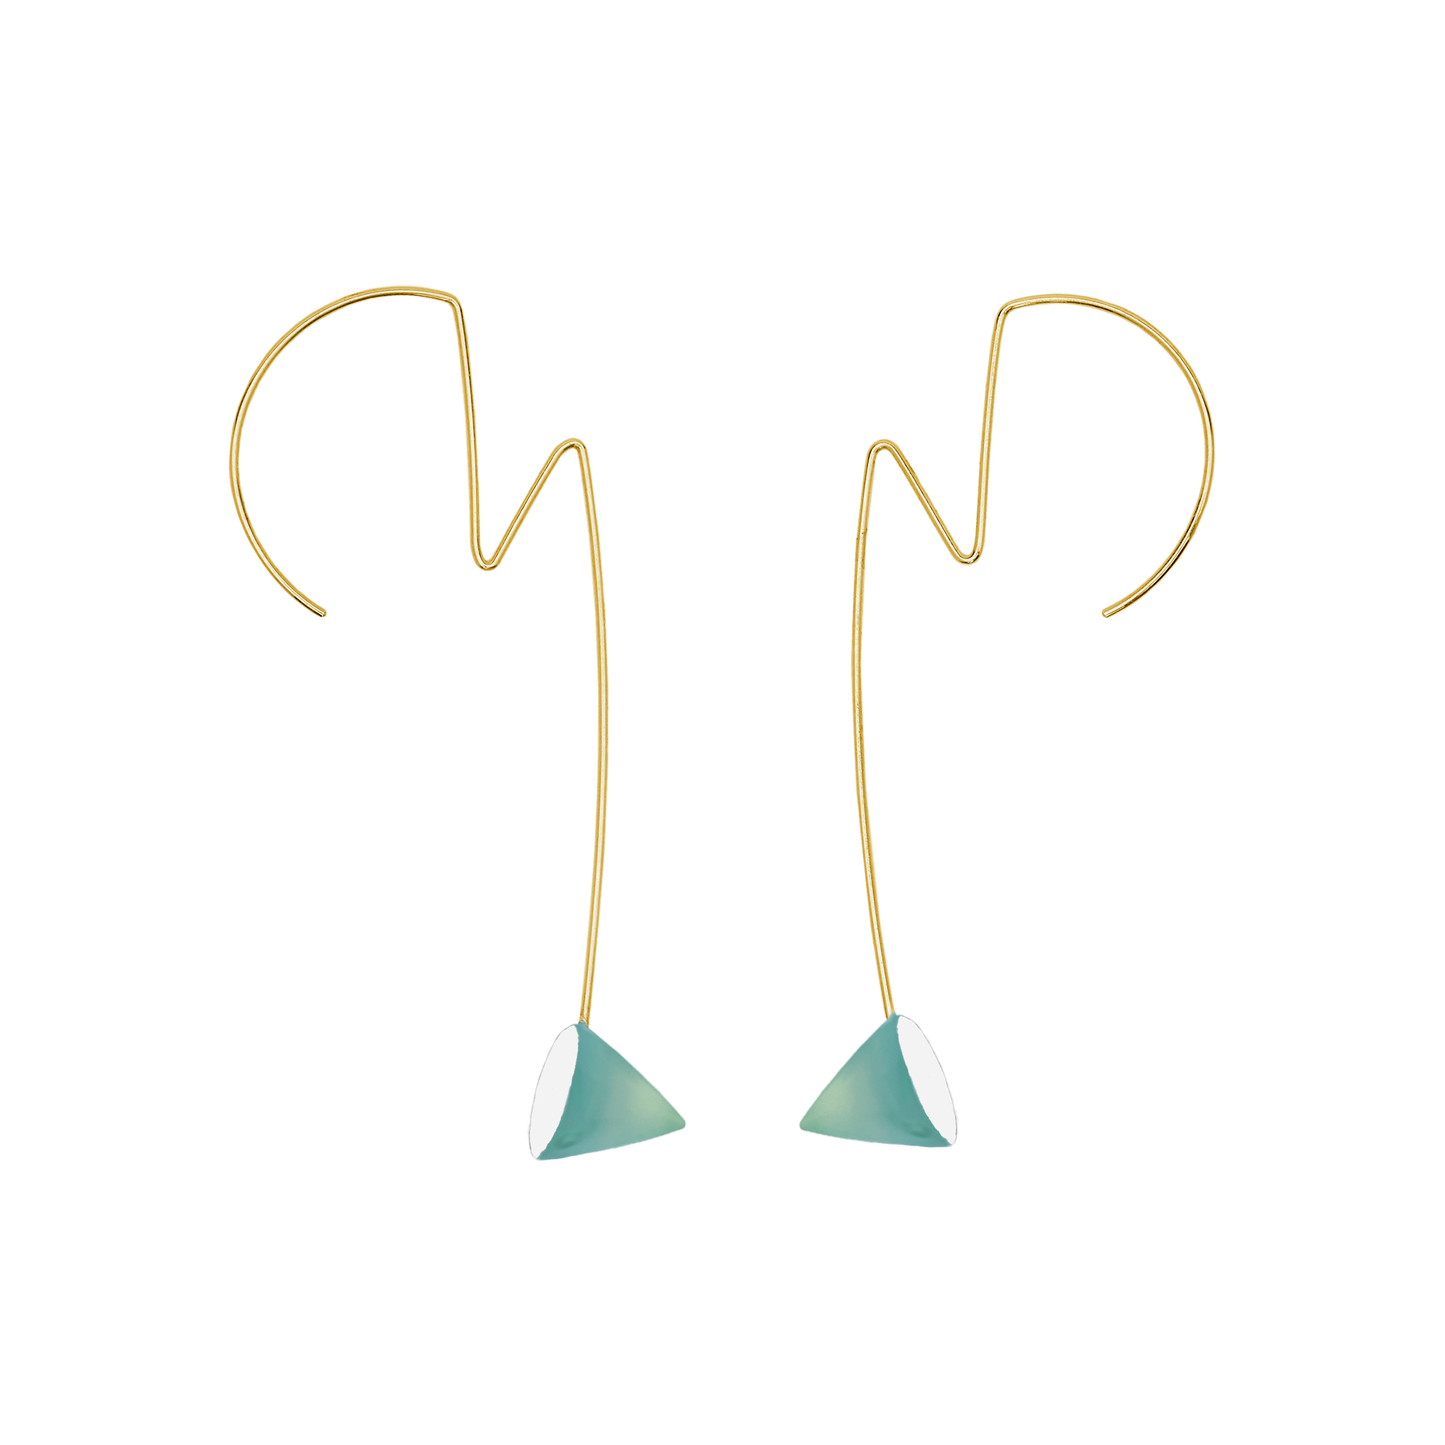 Ziggy Stardust inspired Earrings with Cone Gems